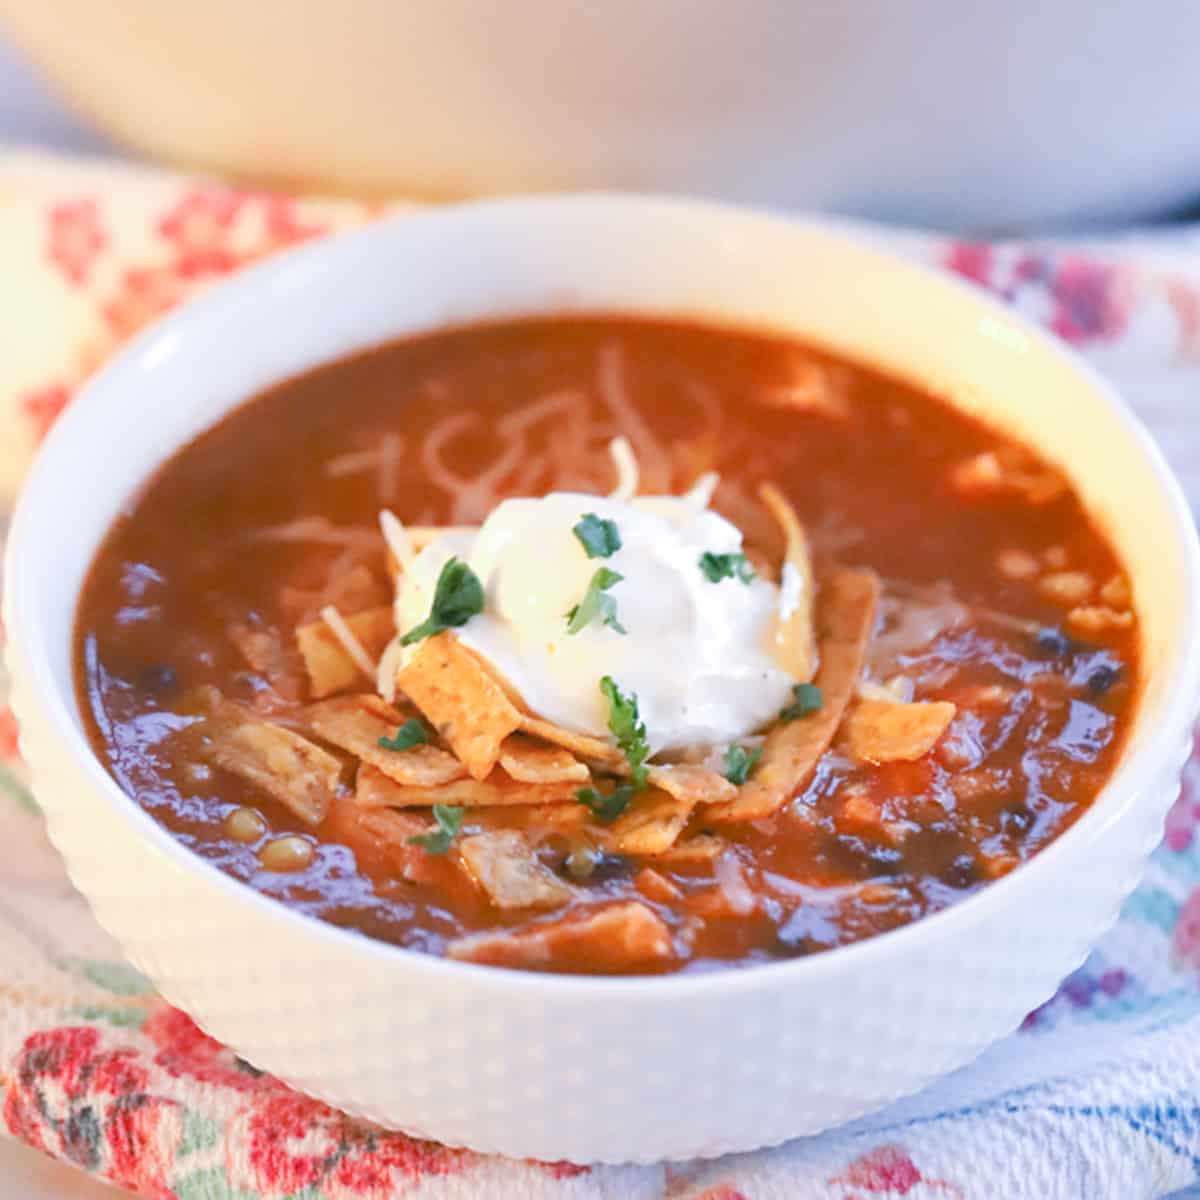 This Turkey Enchilada Soup is one of the best leftover turkey recipes!! It's quick and easy, it can be made in 30 minutes or less.